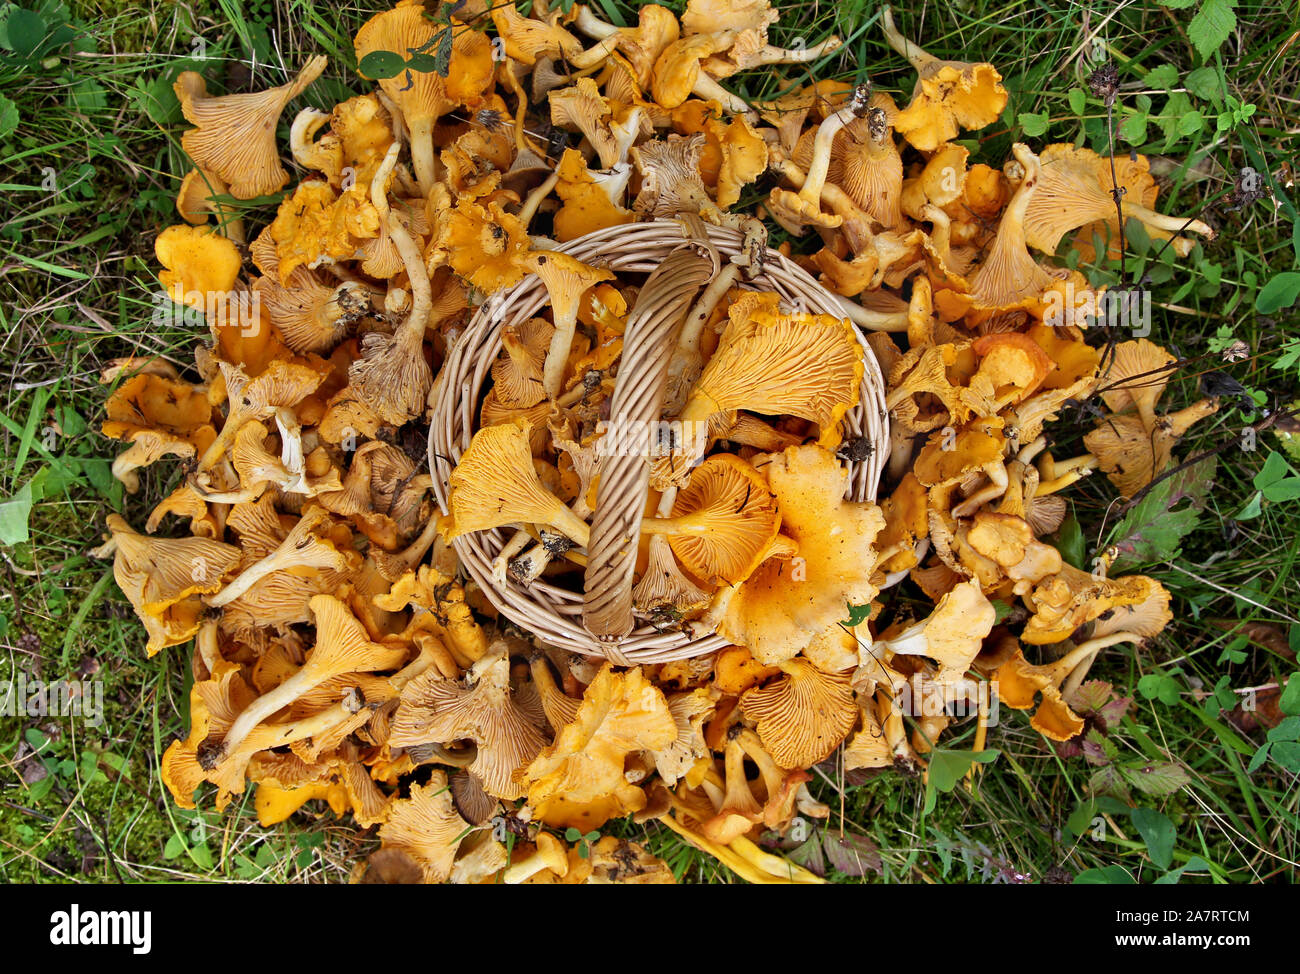 Freshly picked chanterelles (Cantharellus cibarius). Cantharellus cibarius (Latin: cantharellus, 'chanterelle'; cibarius, 'culinary') is a species of golden chanterelle mushroom in the genus Cantharellus. Photo Jeppe Gustafsson Stock Photo